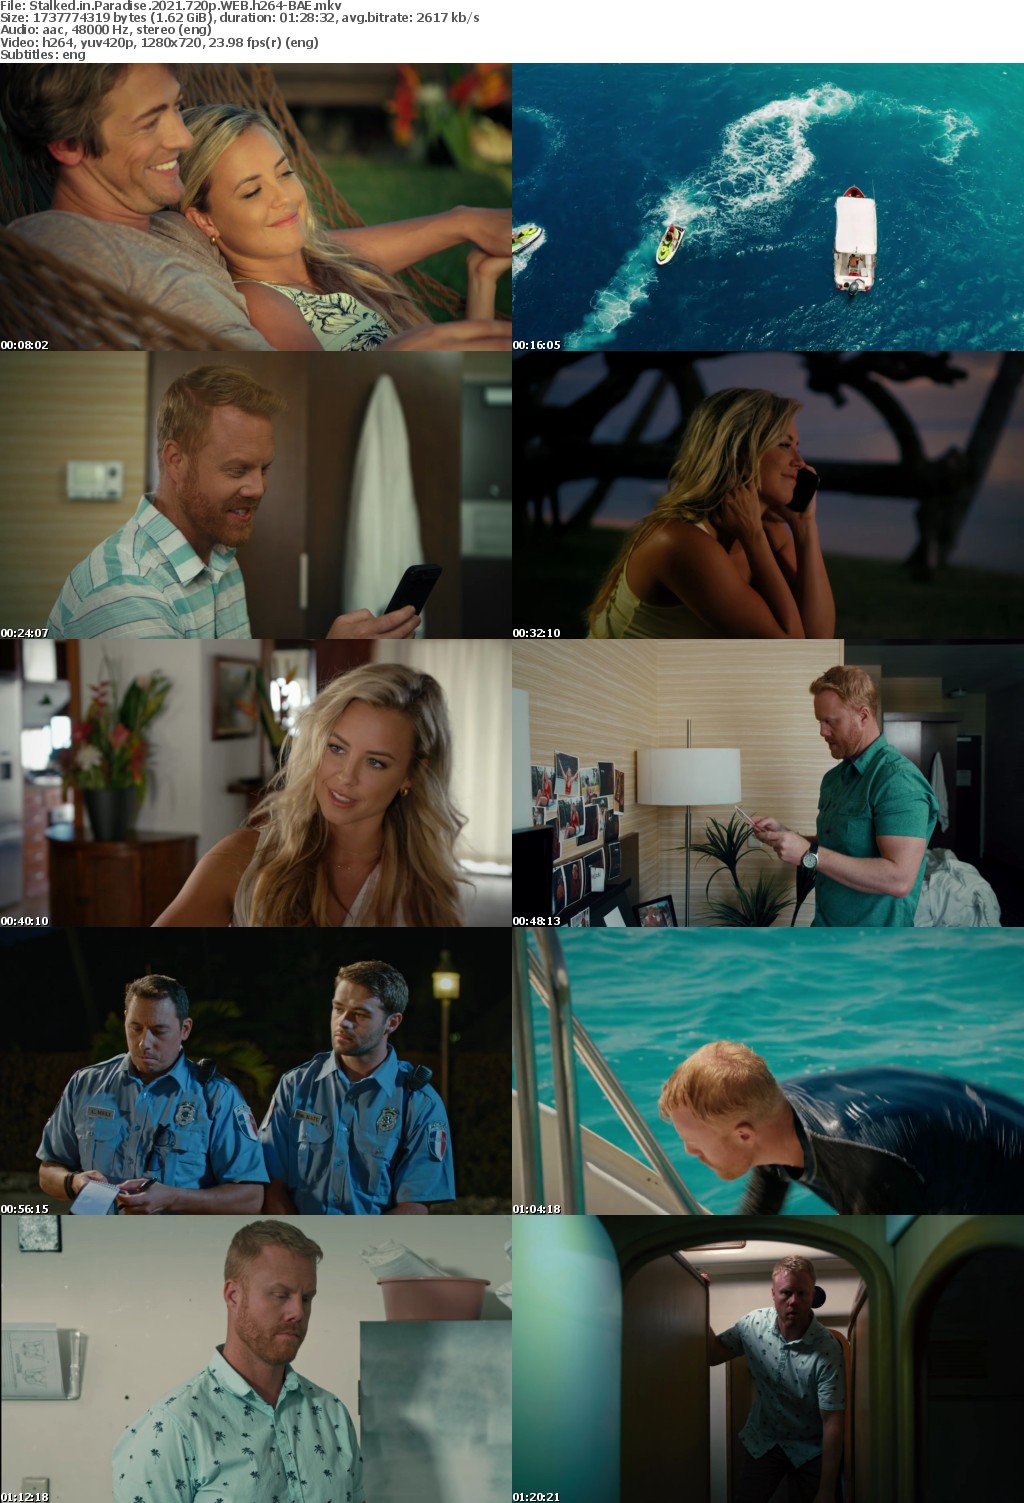 Stalked In Paradise 2021 720p WEB H264-BAE